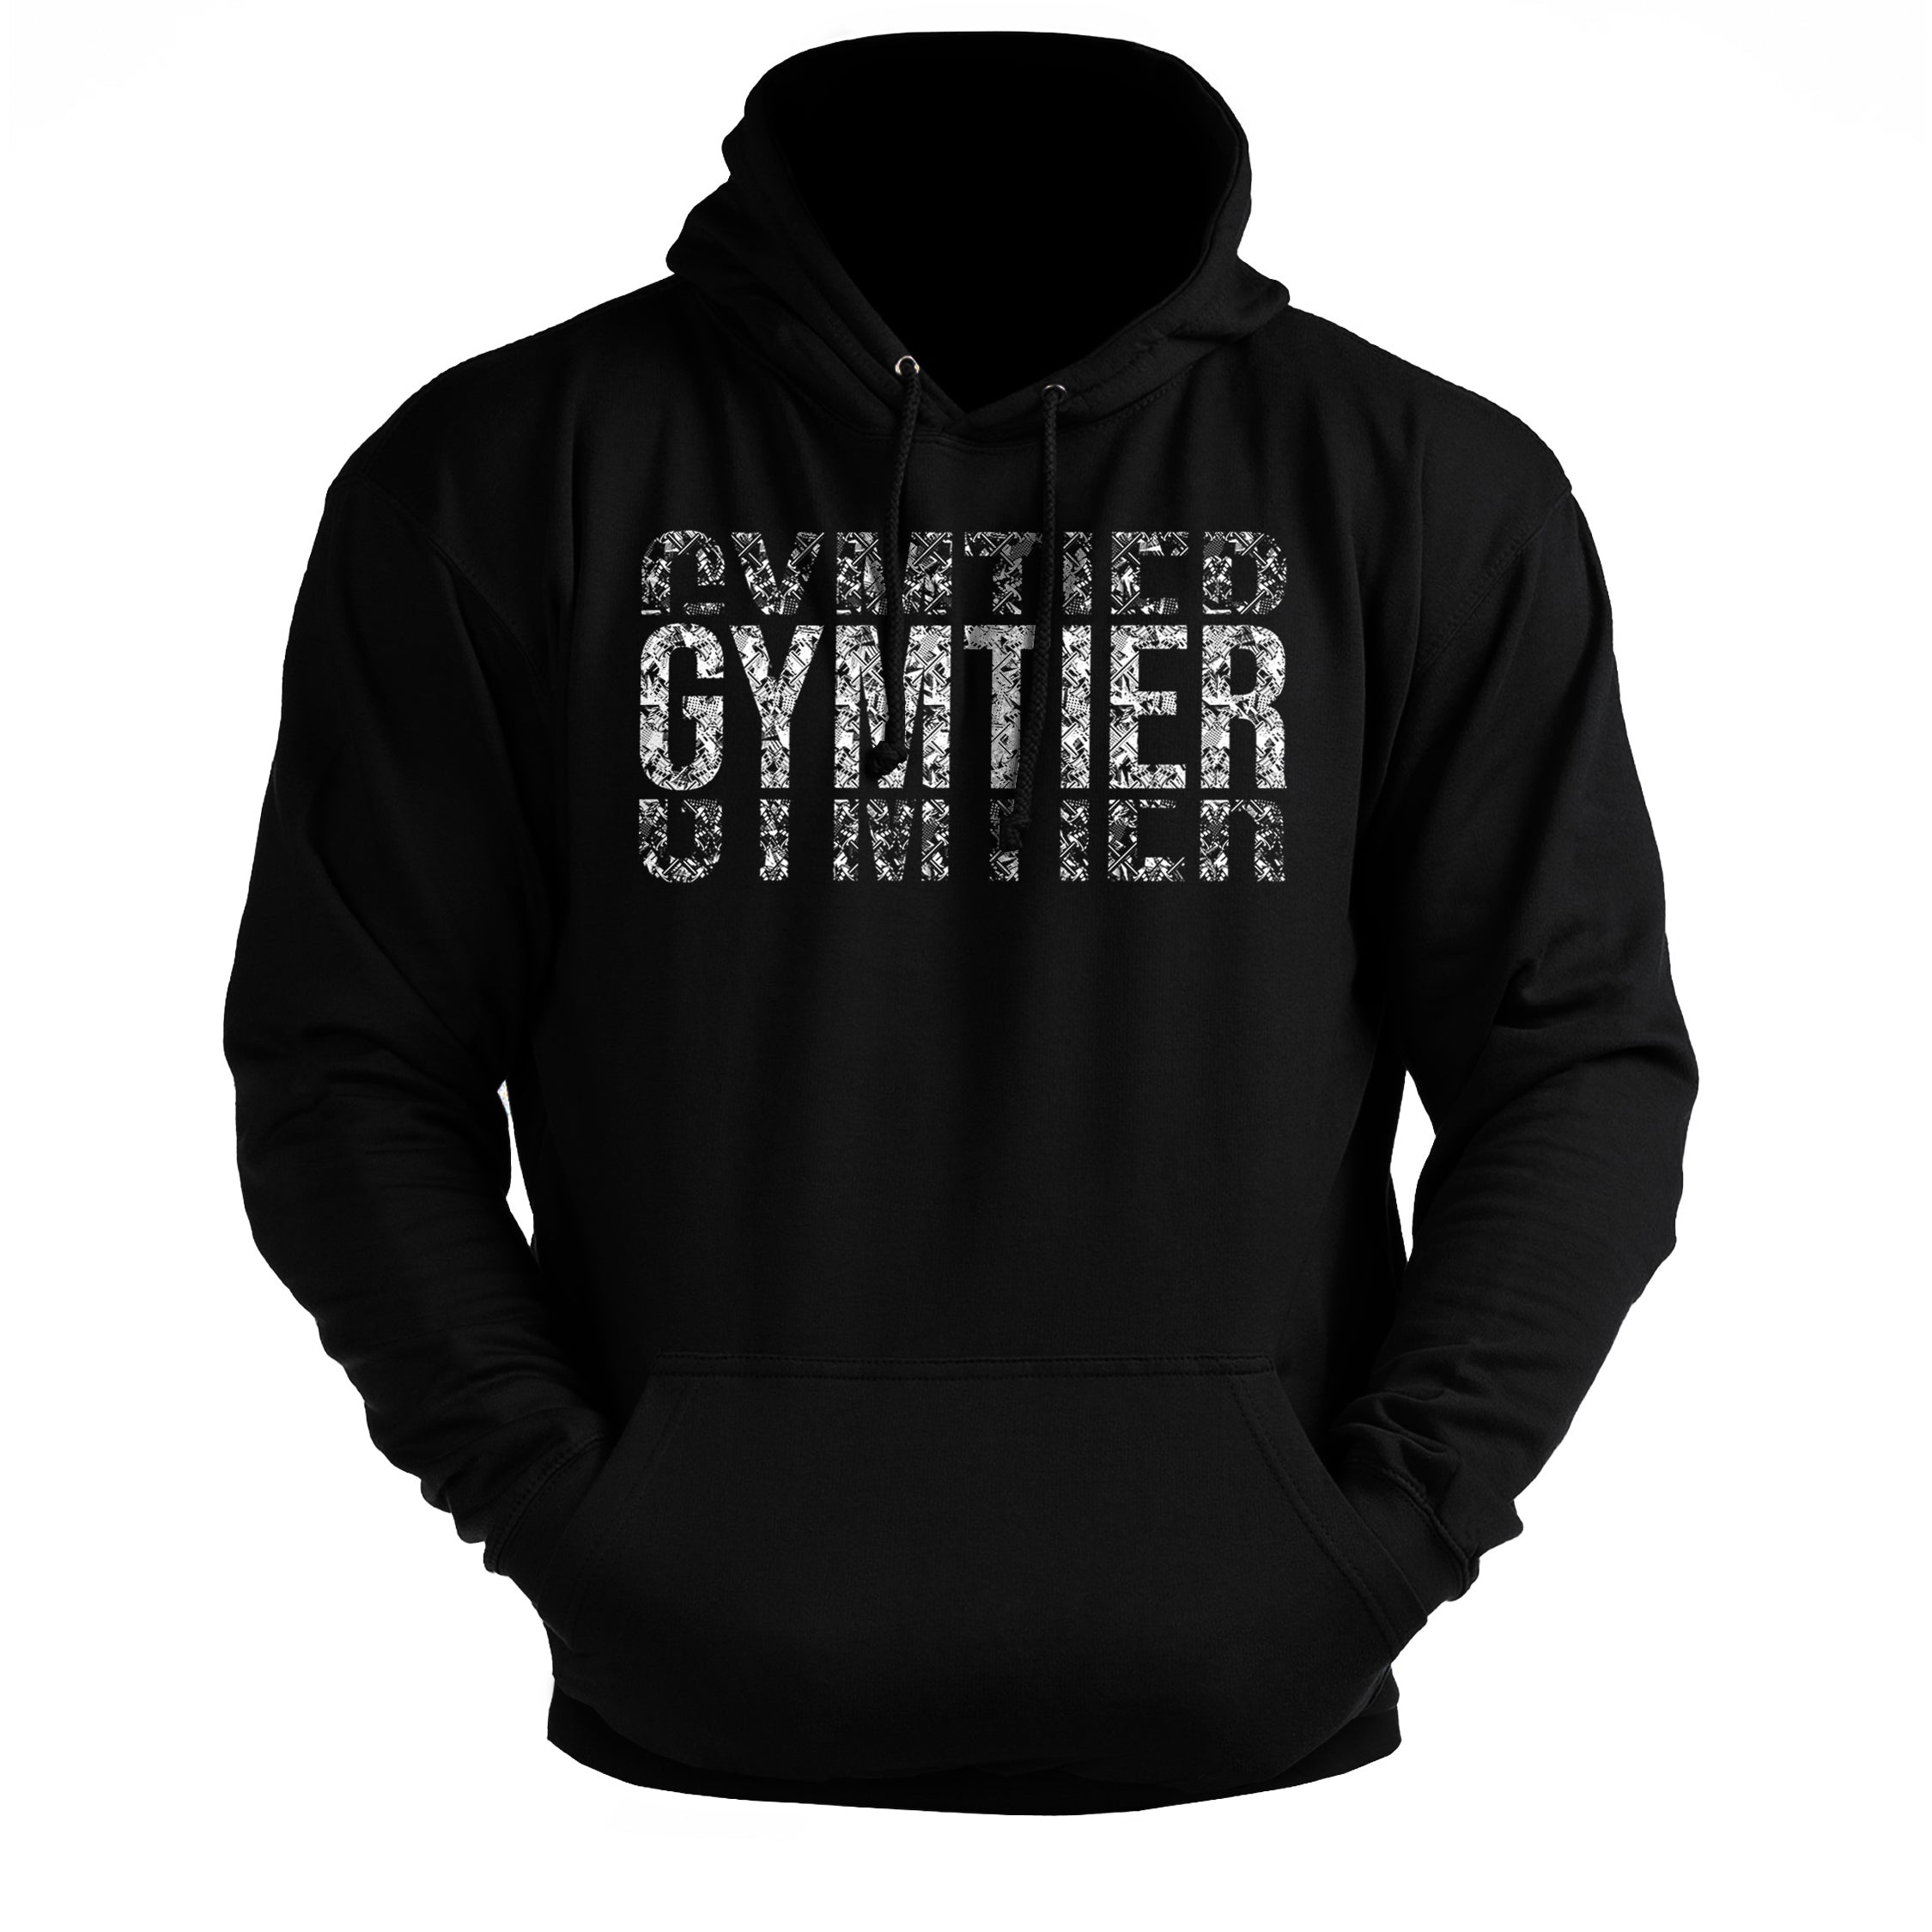 Gymtier - Gym Hoodie